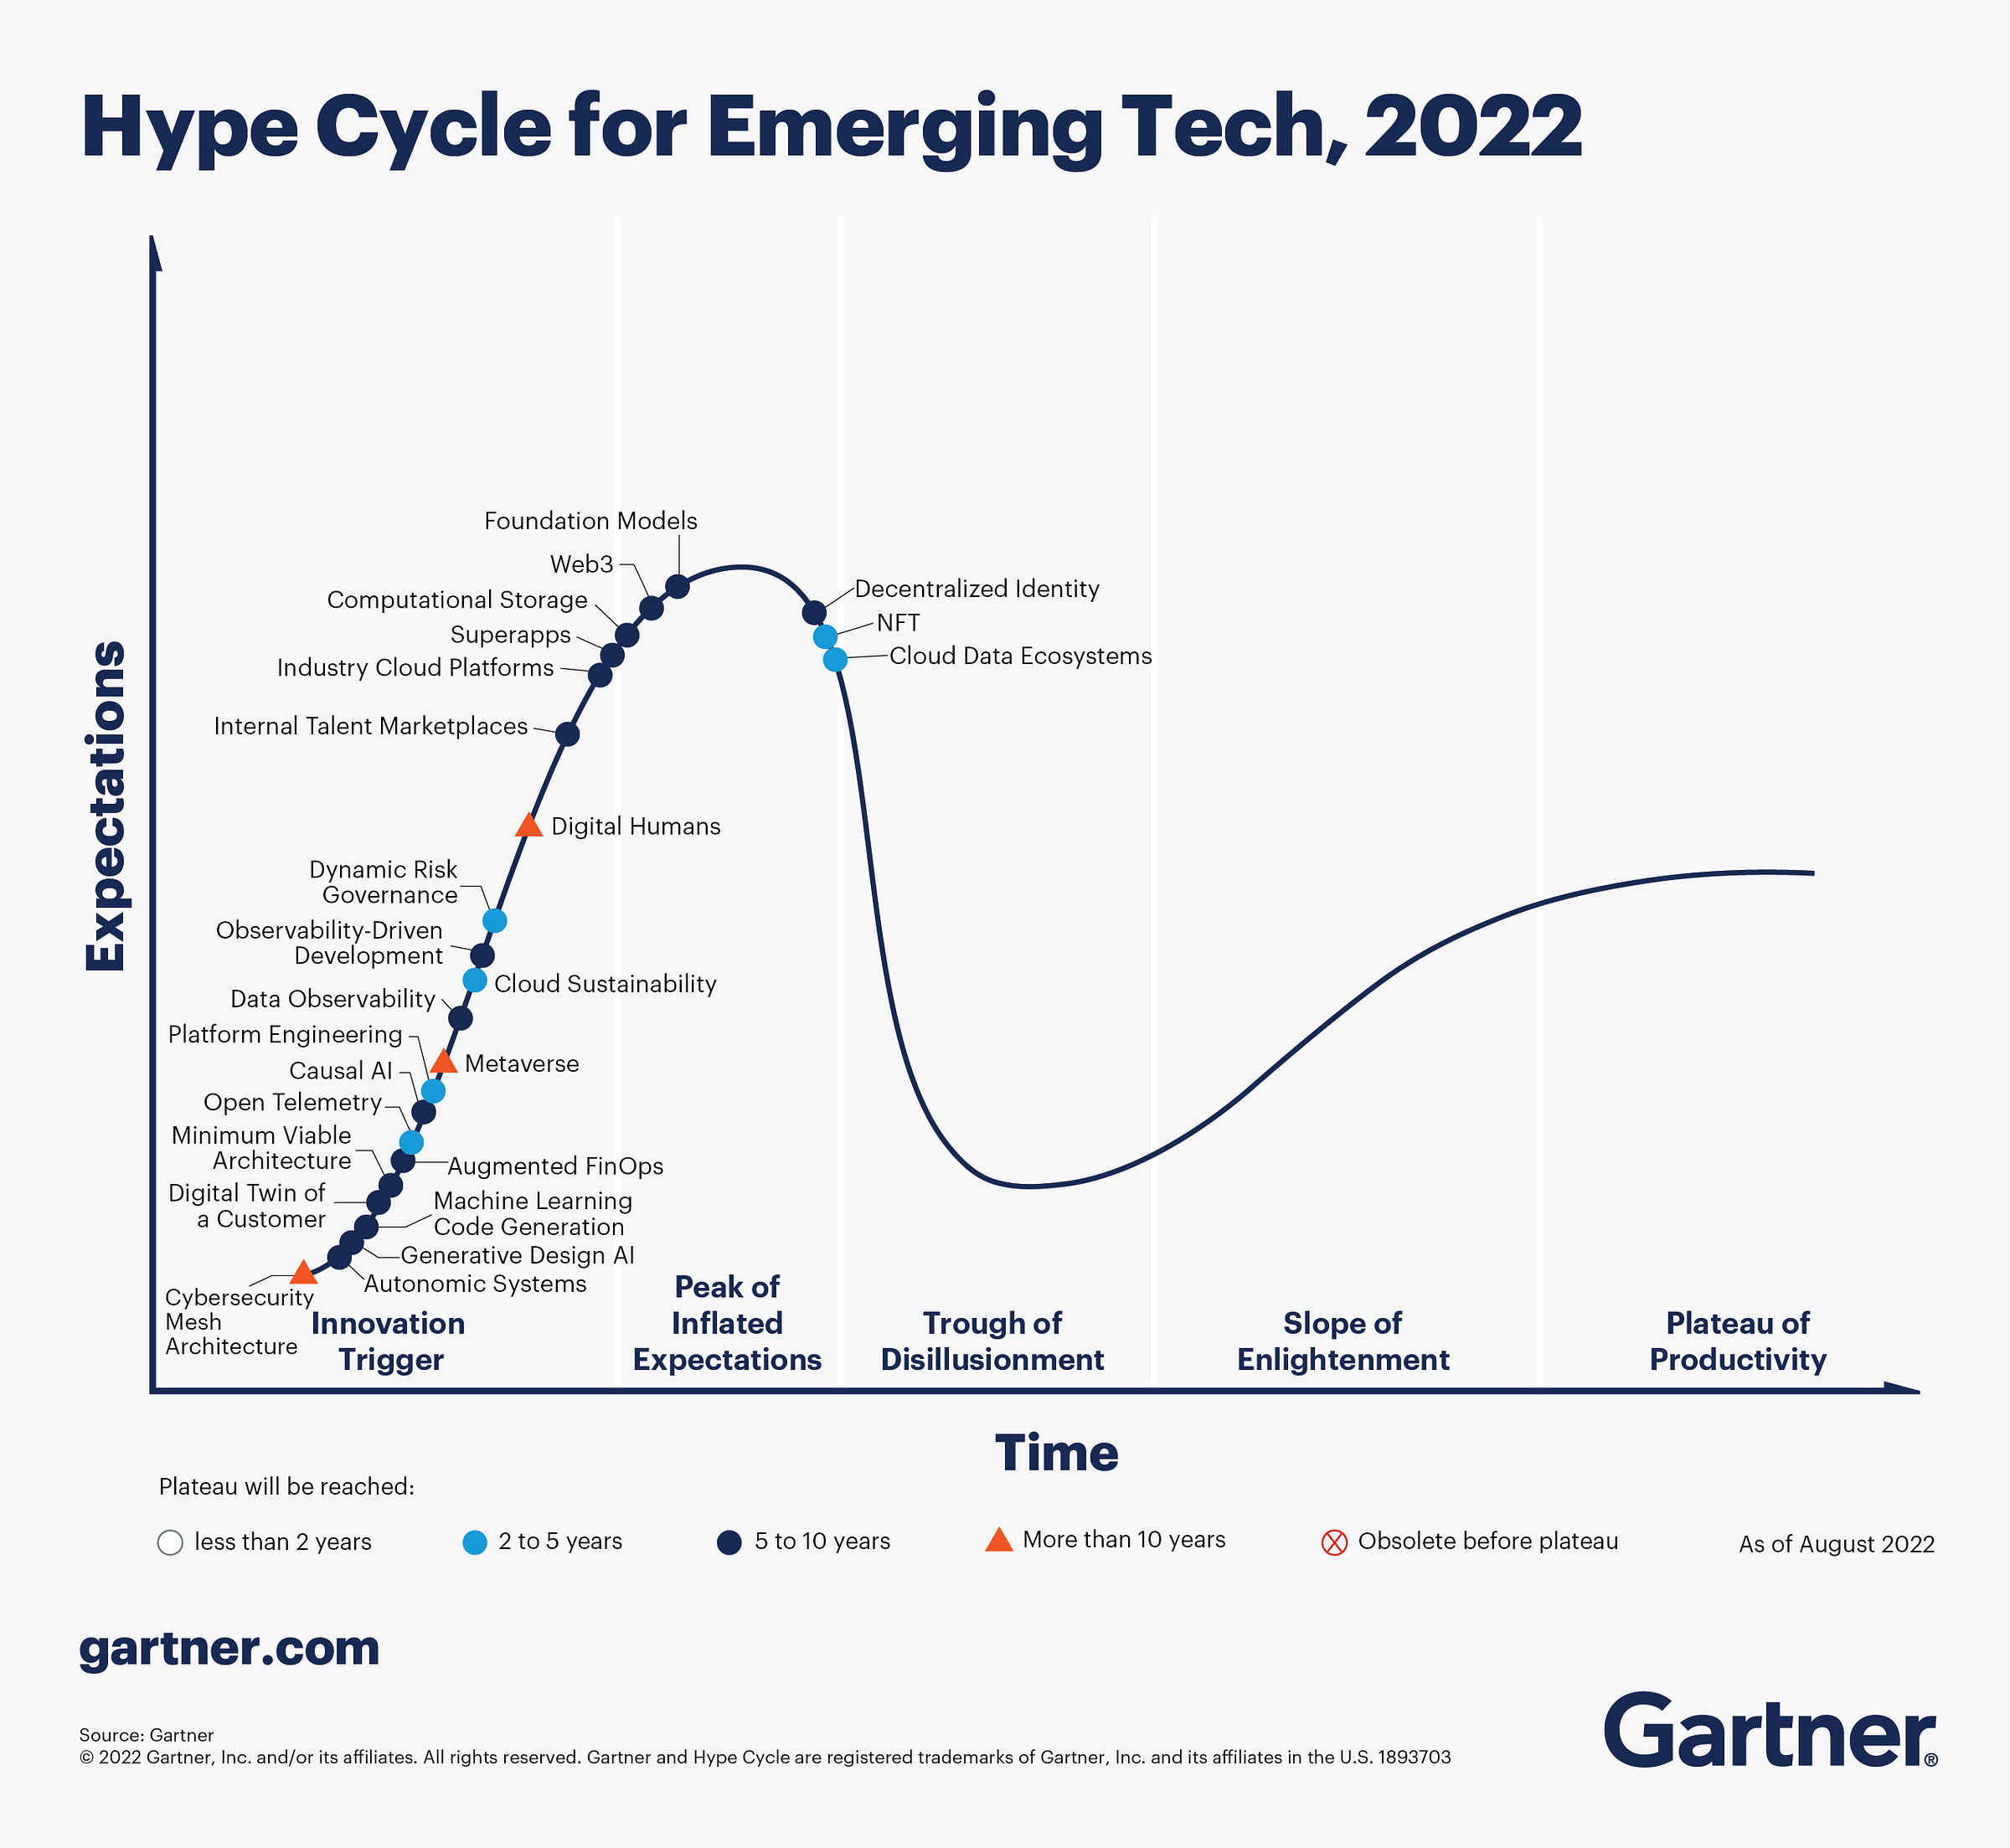 Hype Cycle for Emerging Tech 2022